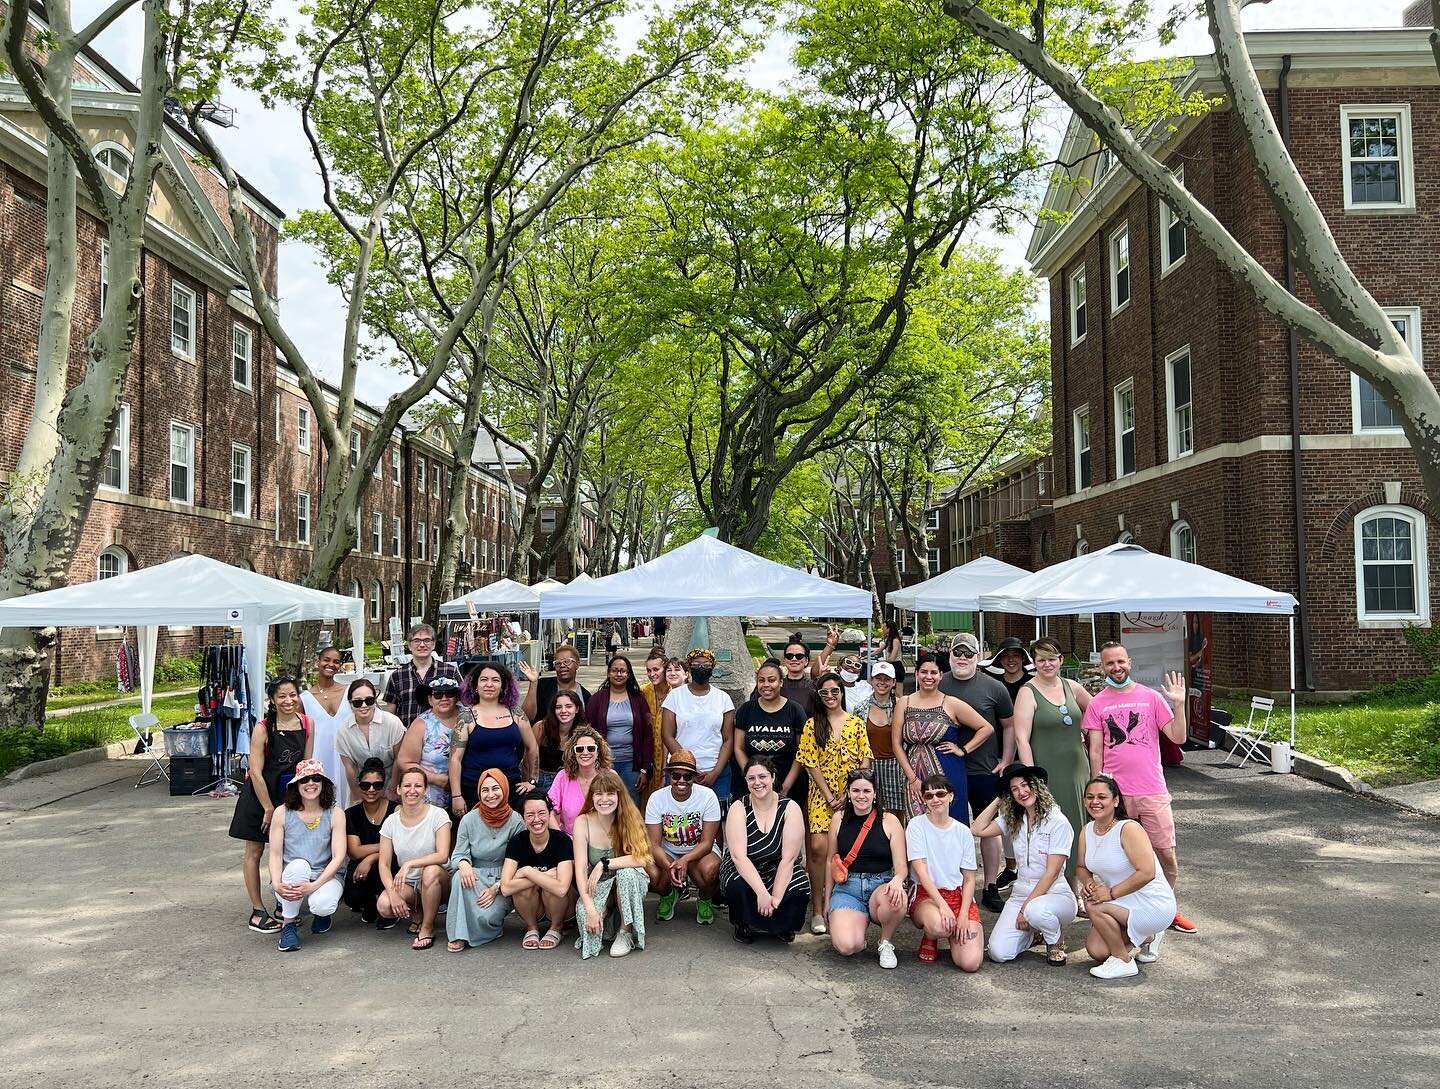 Big thank you to our community for showing up and shopping small this weekend @governorsisland!🌞From our makers to shoppers, we appreciate you all so much 💗 

Next up: Our Summer Pop-up @theinvisibledog on June 11+12. See you there! 💫